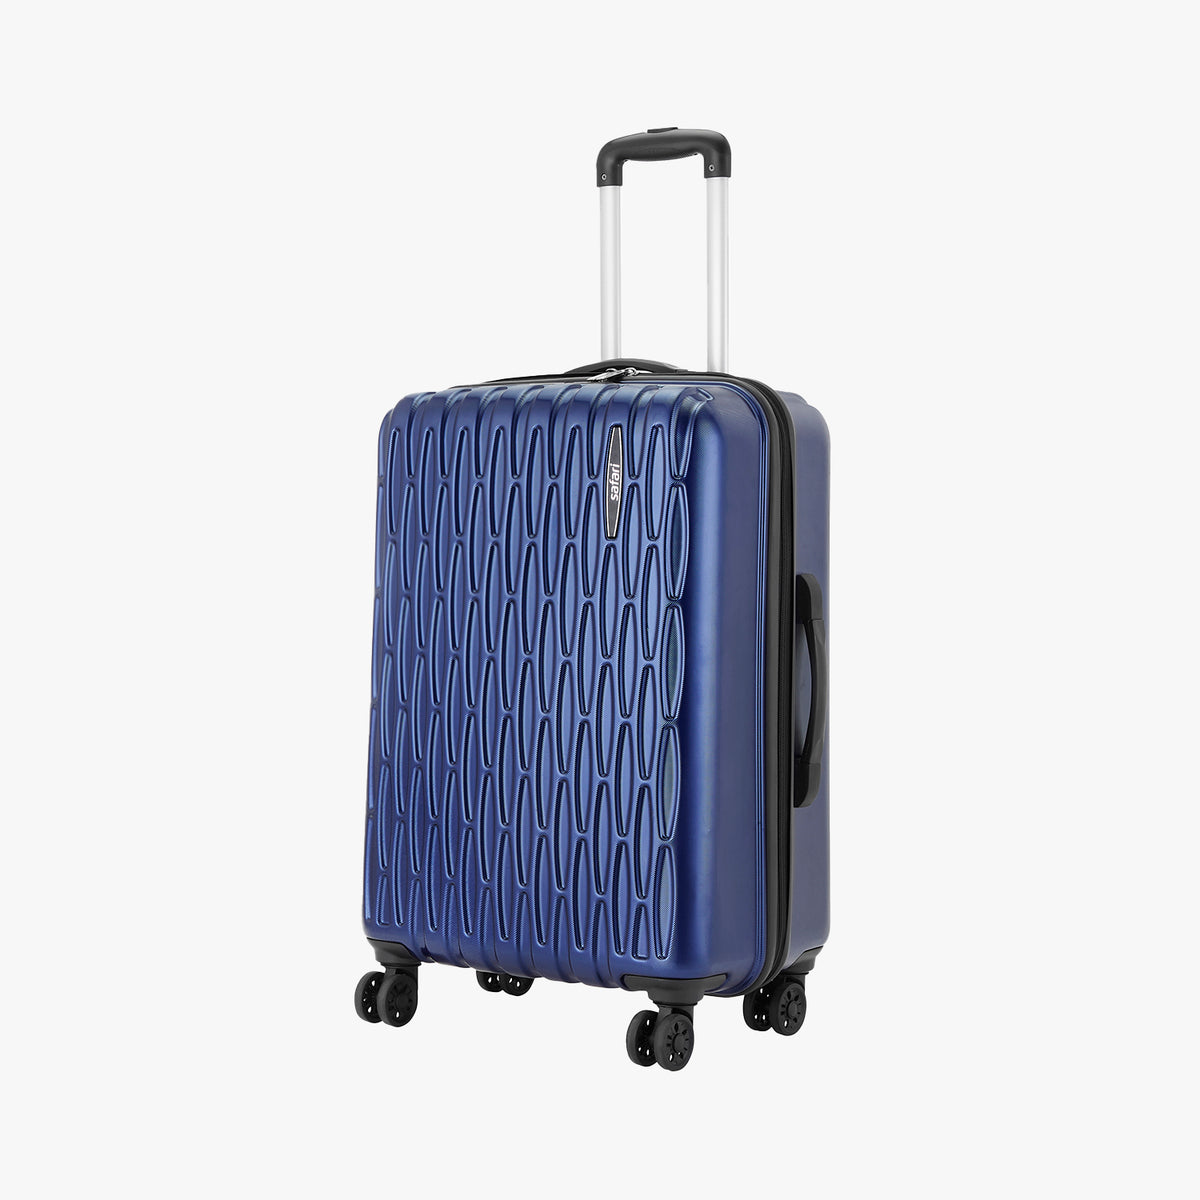 Plastic Gift Corporate Trolley Luggage bag in Delhi at best price by S.J  Gift india - Justdial